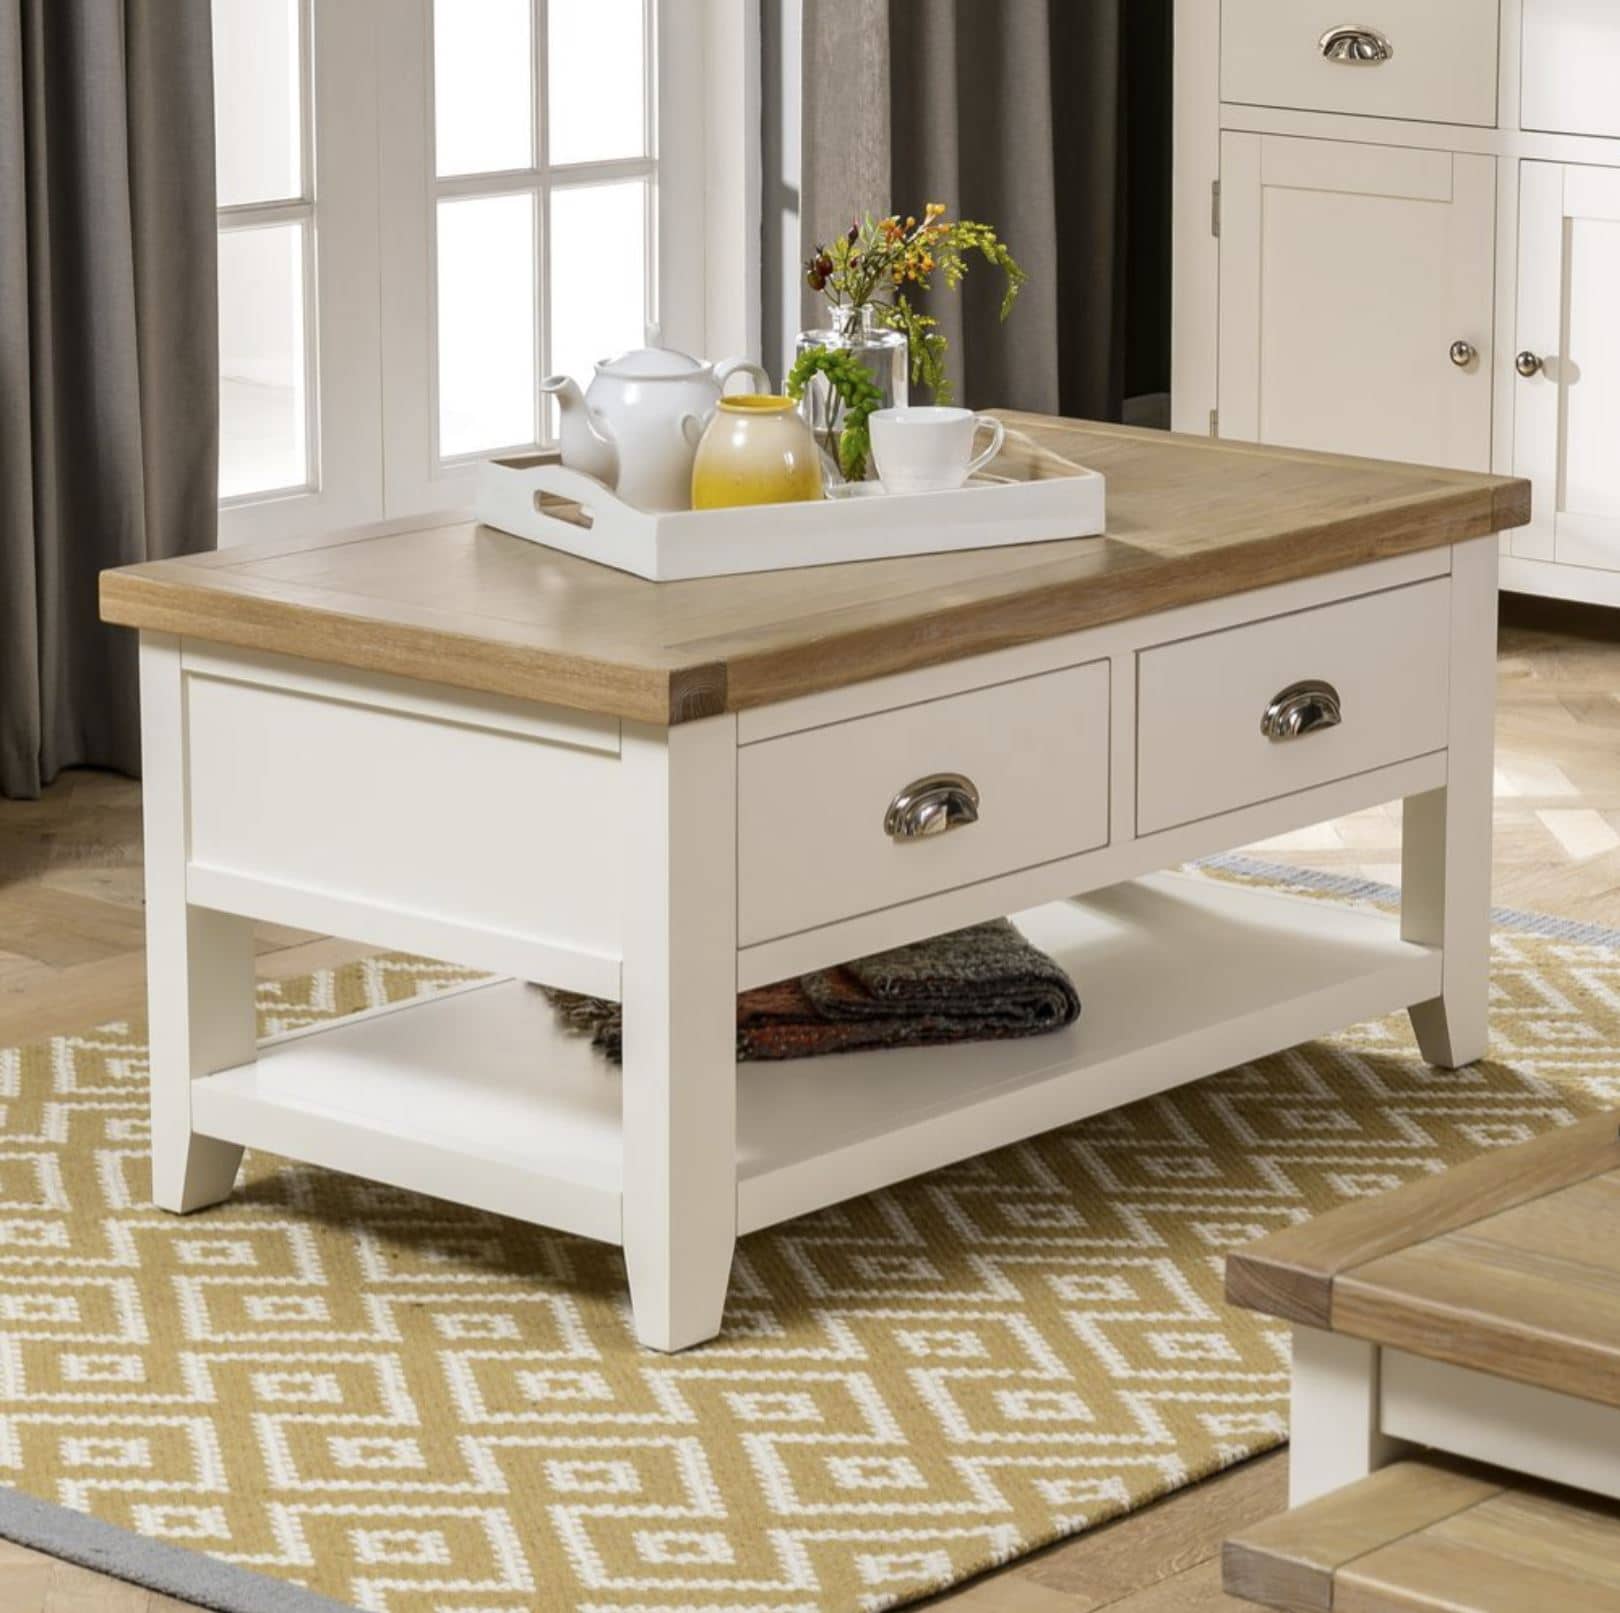 Cosy Nights In with our Cheshire Cream Painted 2 Drawer Coffee Table with Shelf